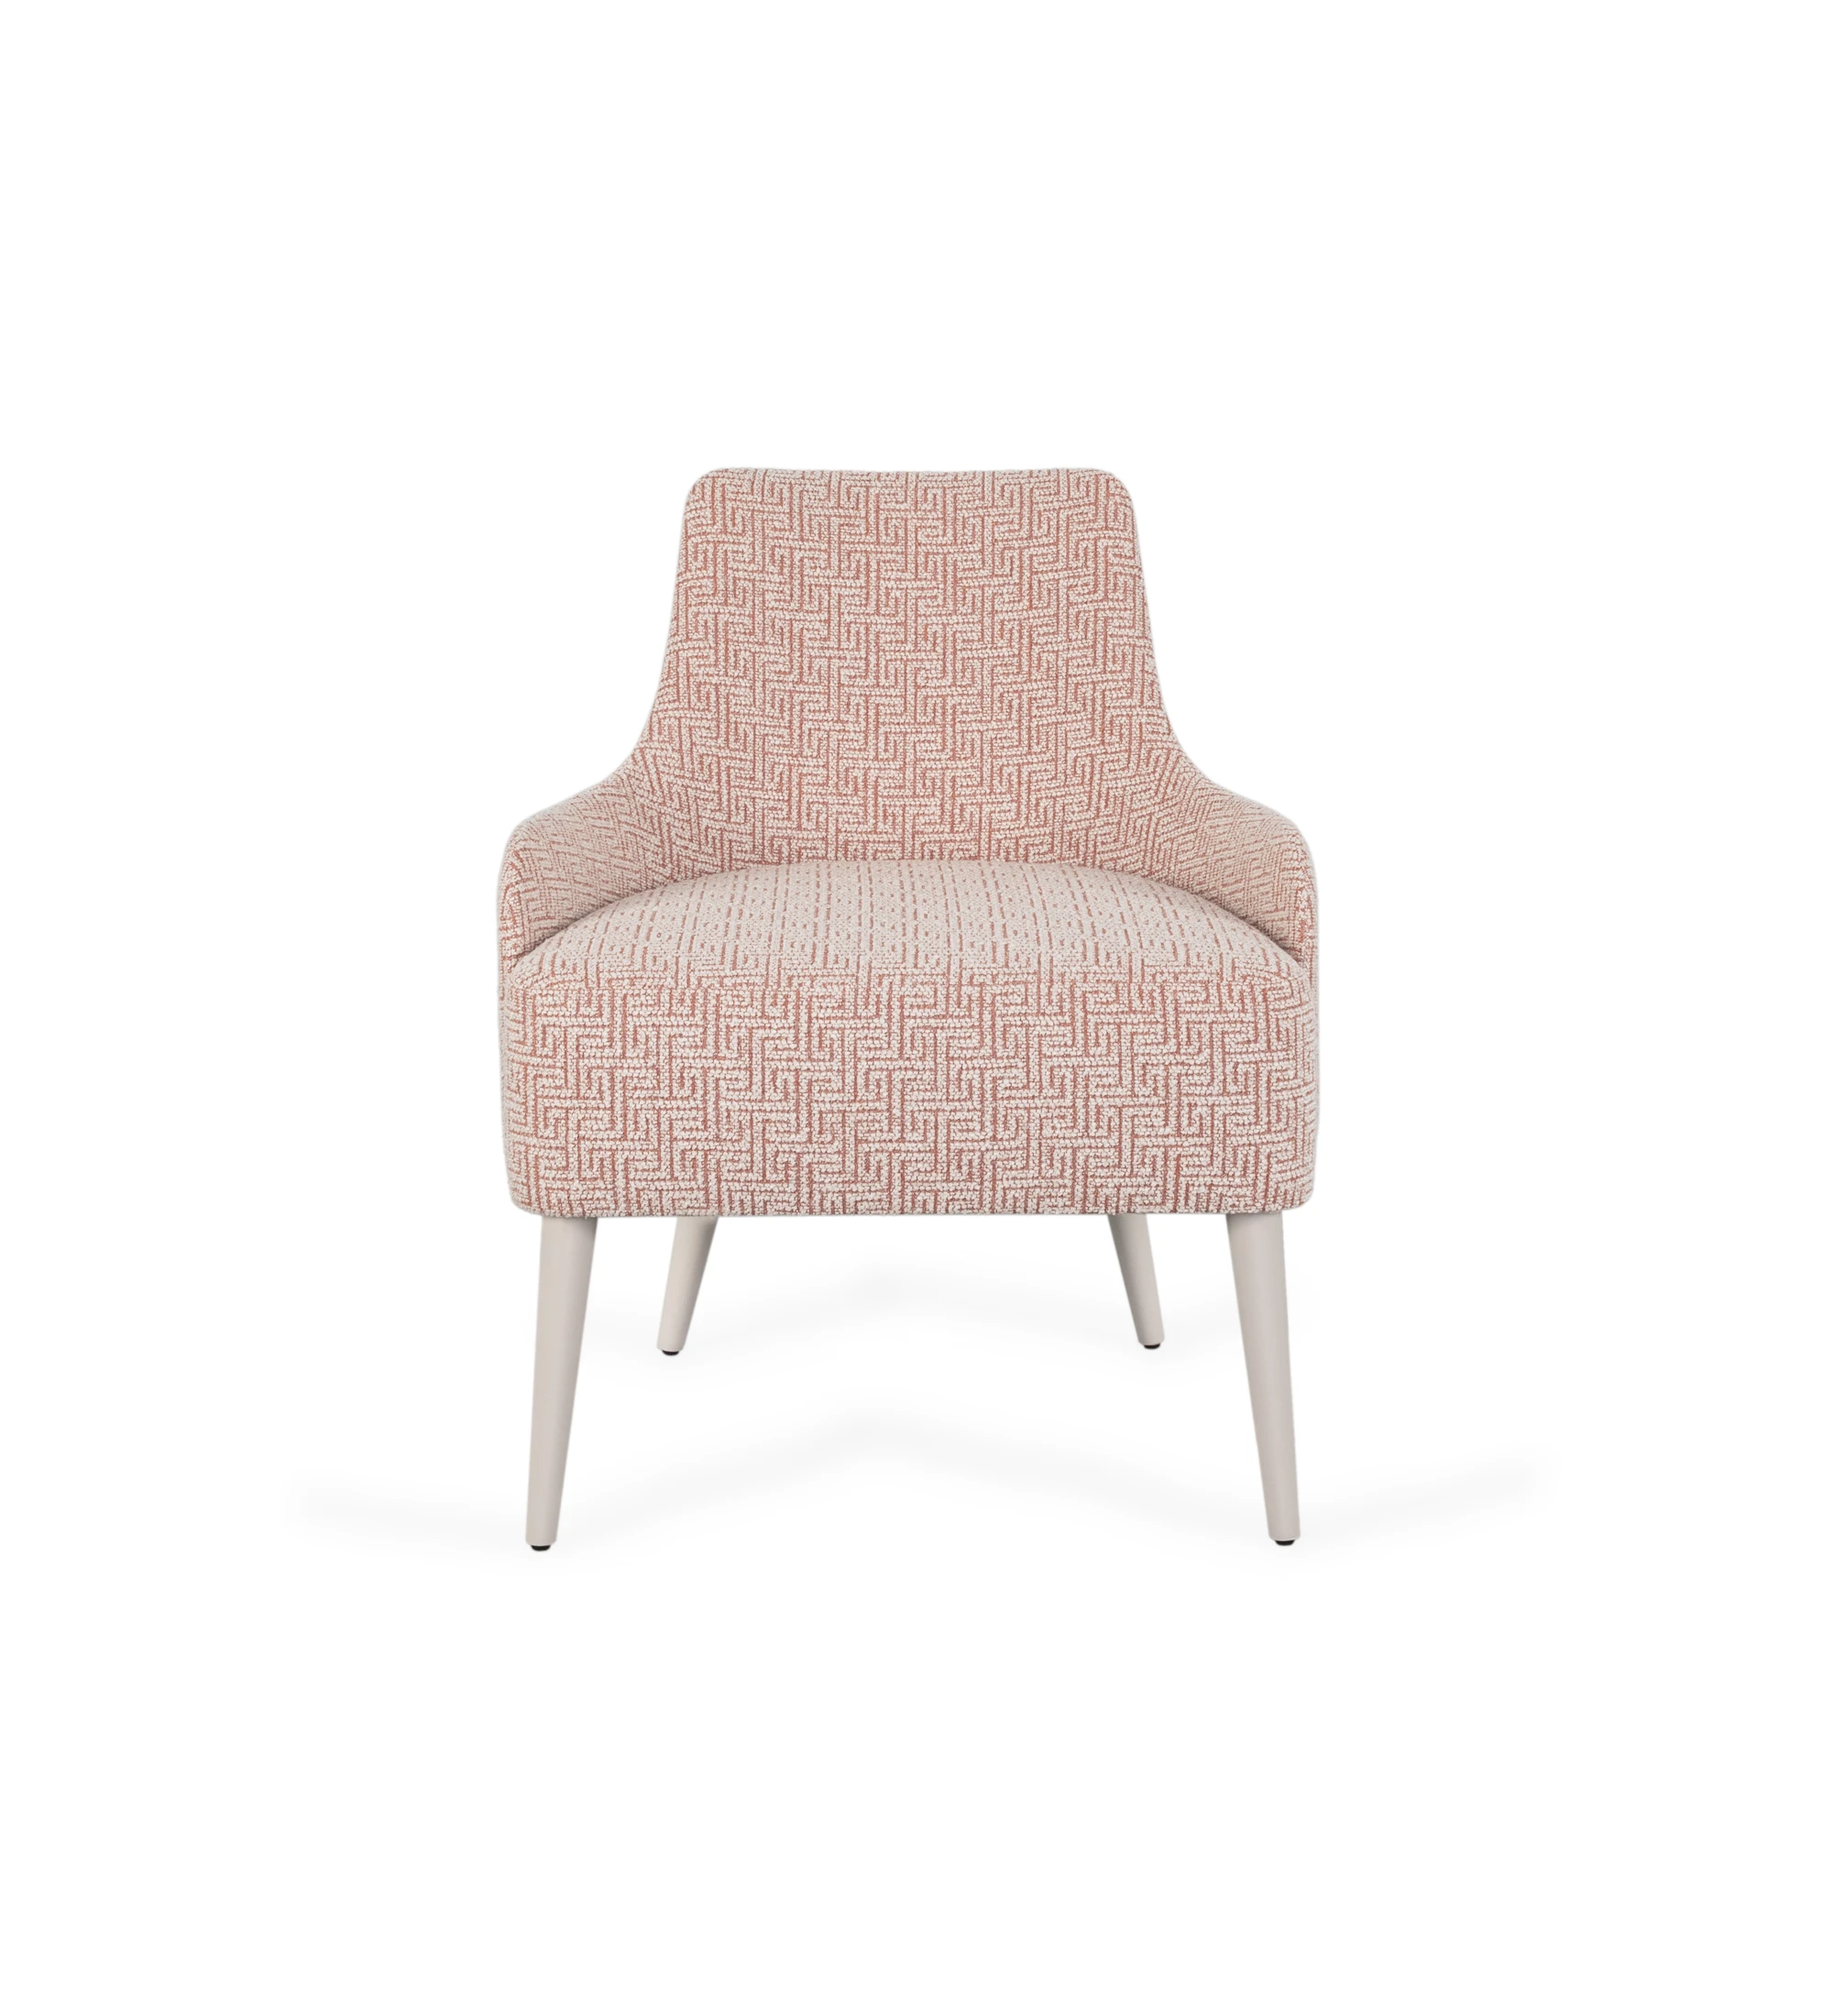 Oslo armchair upholstered in fabric, pearl lacquered feet.